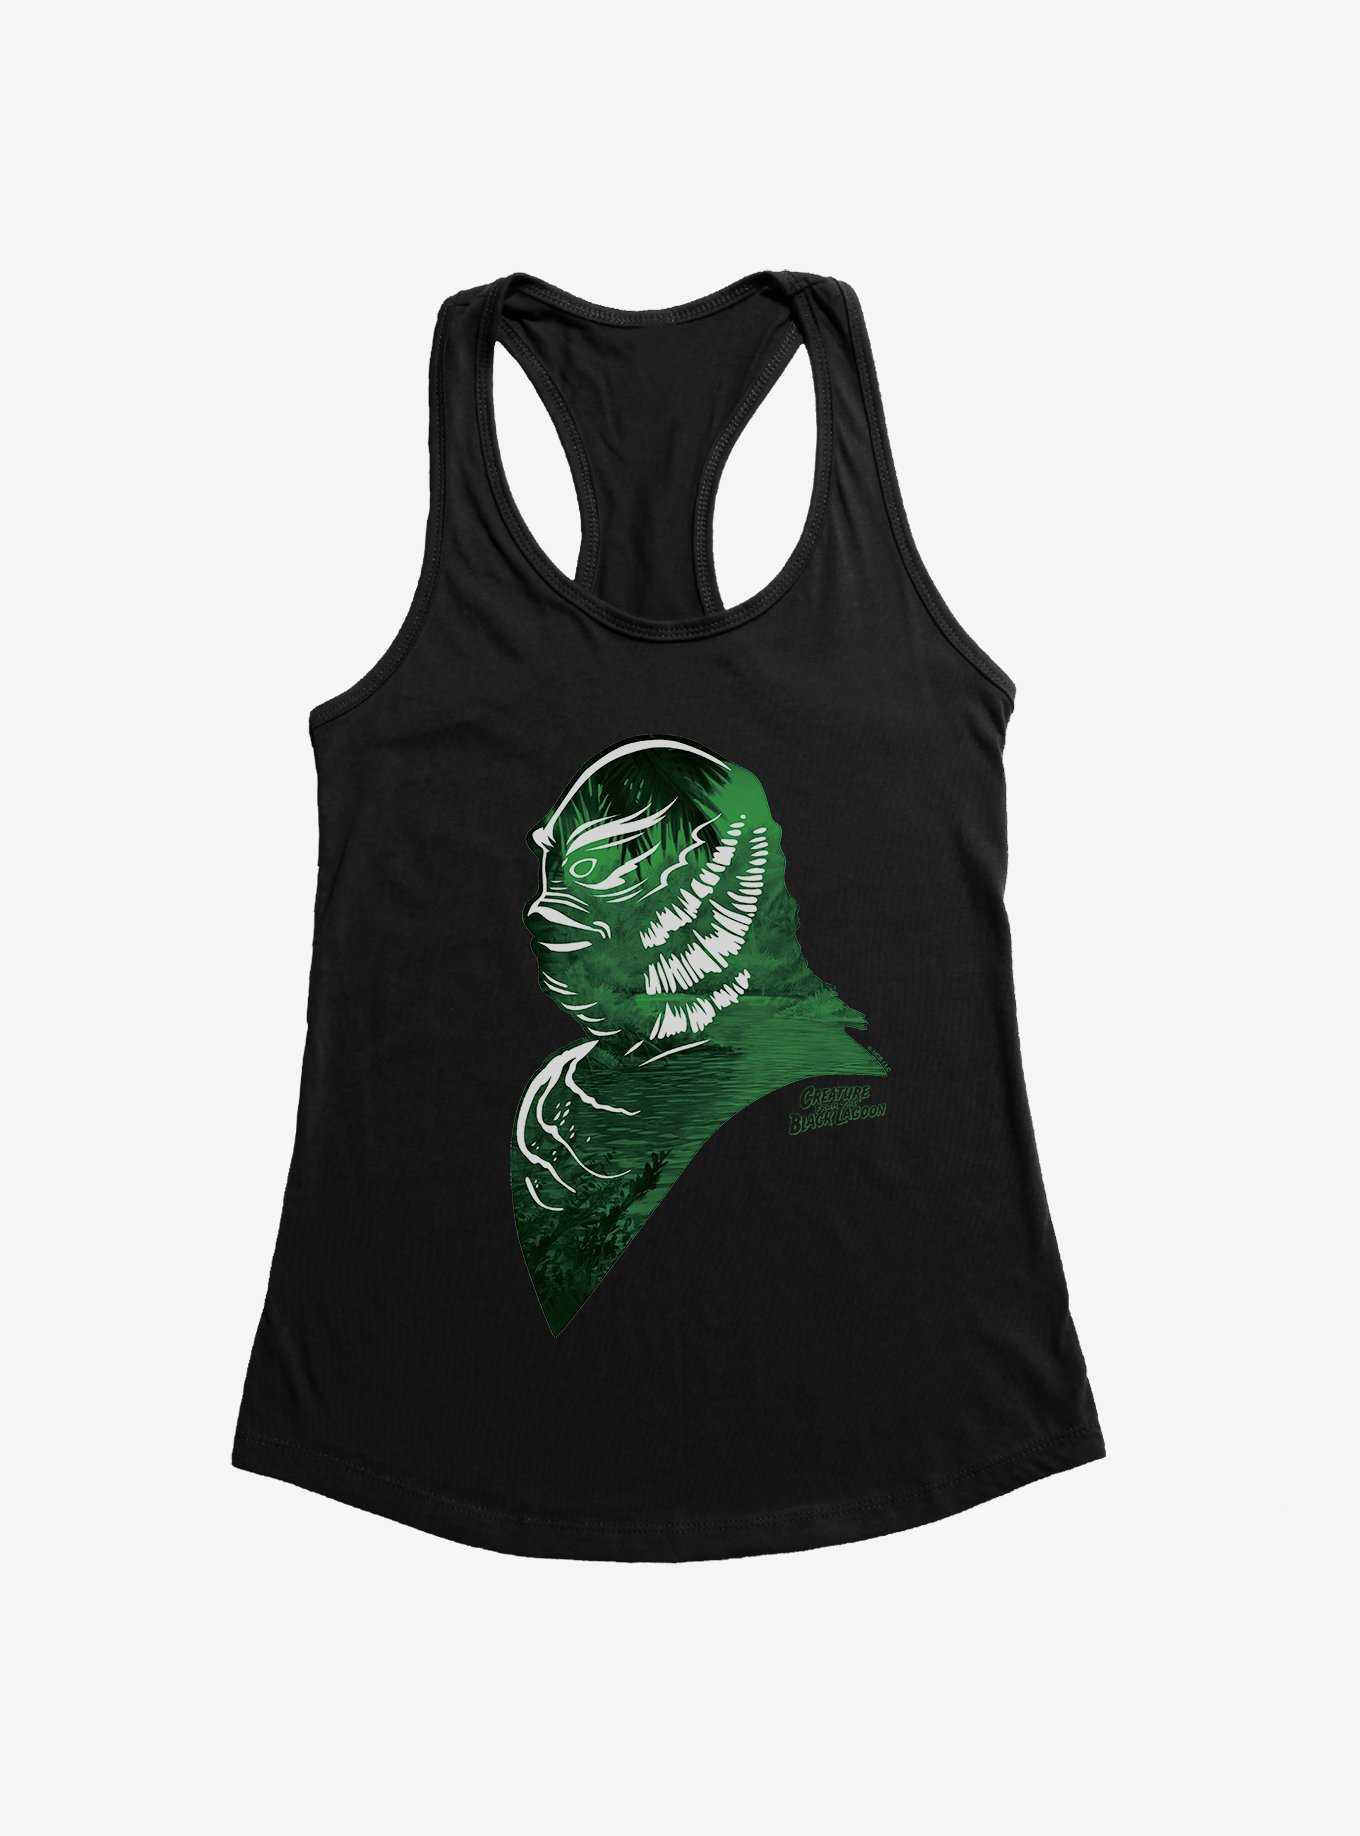 Universal Monsters Creature From The Black Lagoon Amazon Profile Womens Tank Top, , hi-res